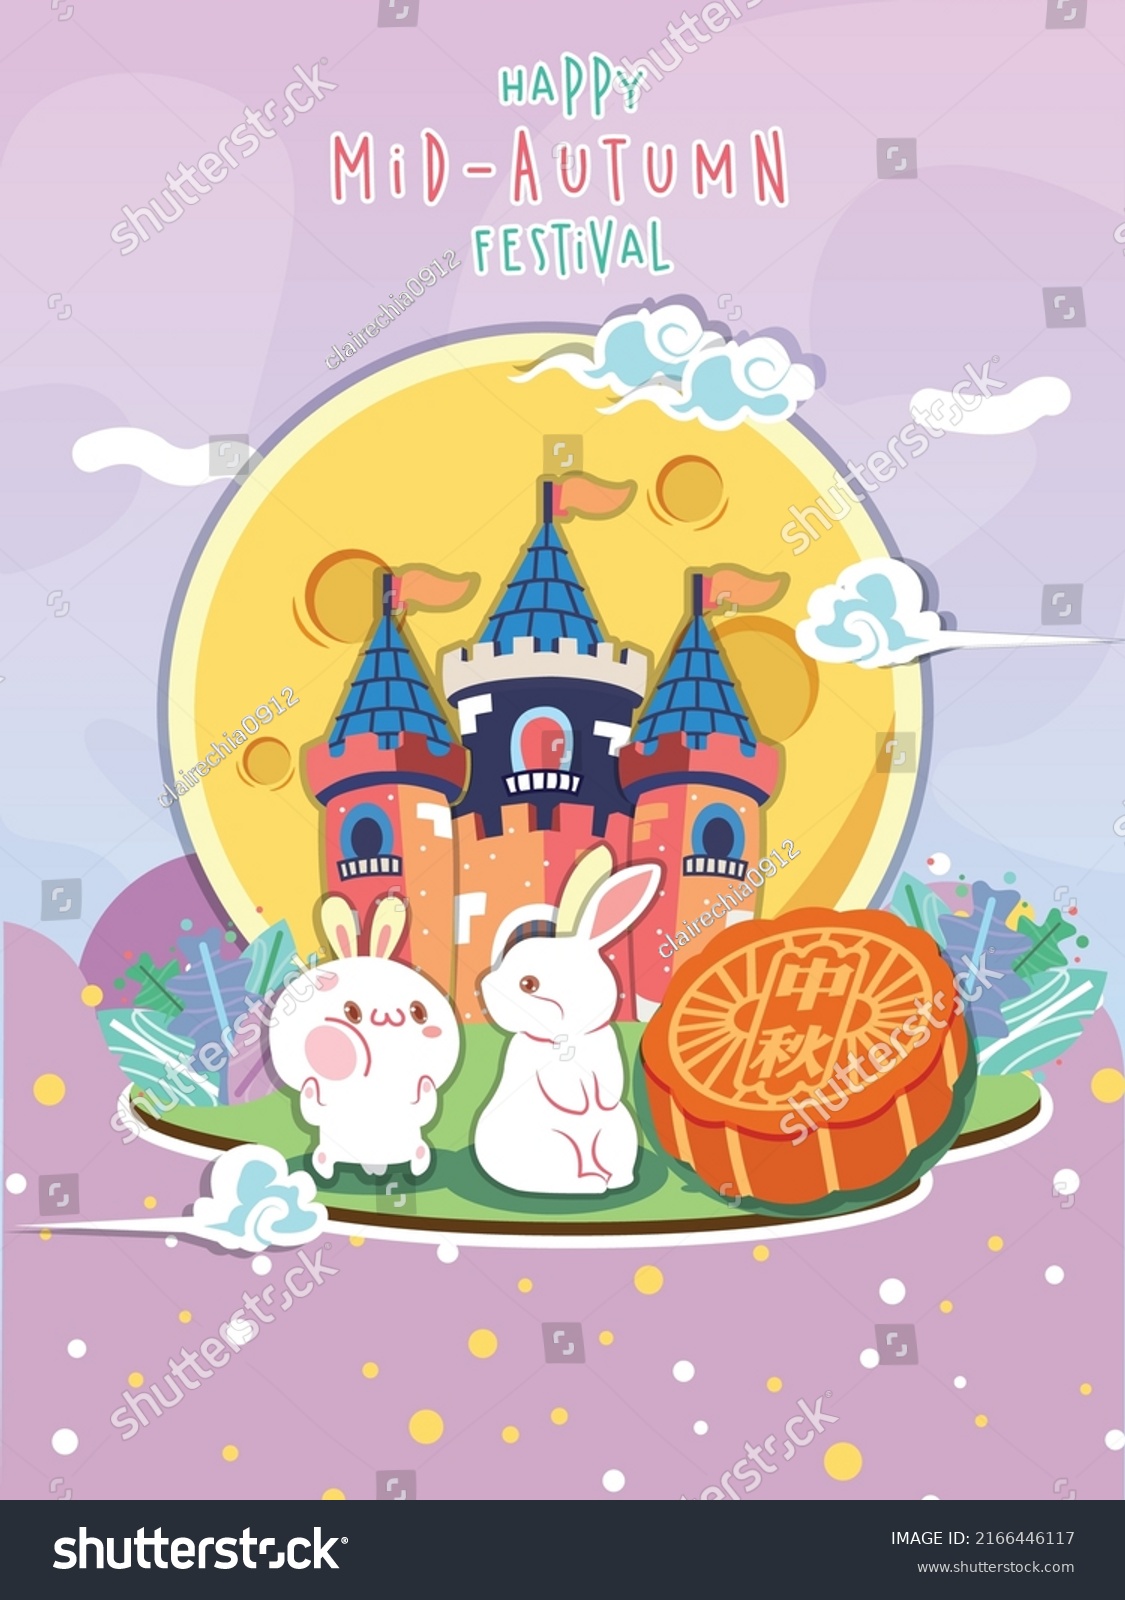 SVG of Happy mid-autumn festival banner with fat rabbit enjoying mooncake and the full moon on shiny starry night, holiday name in chinese characters svg